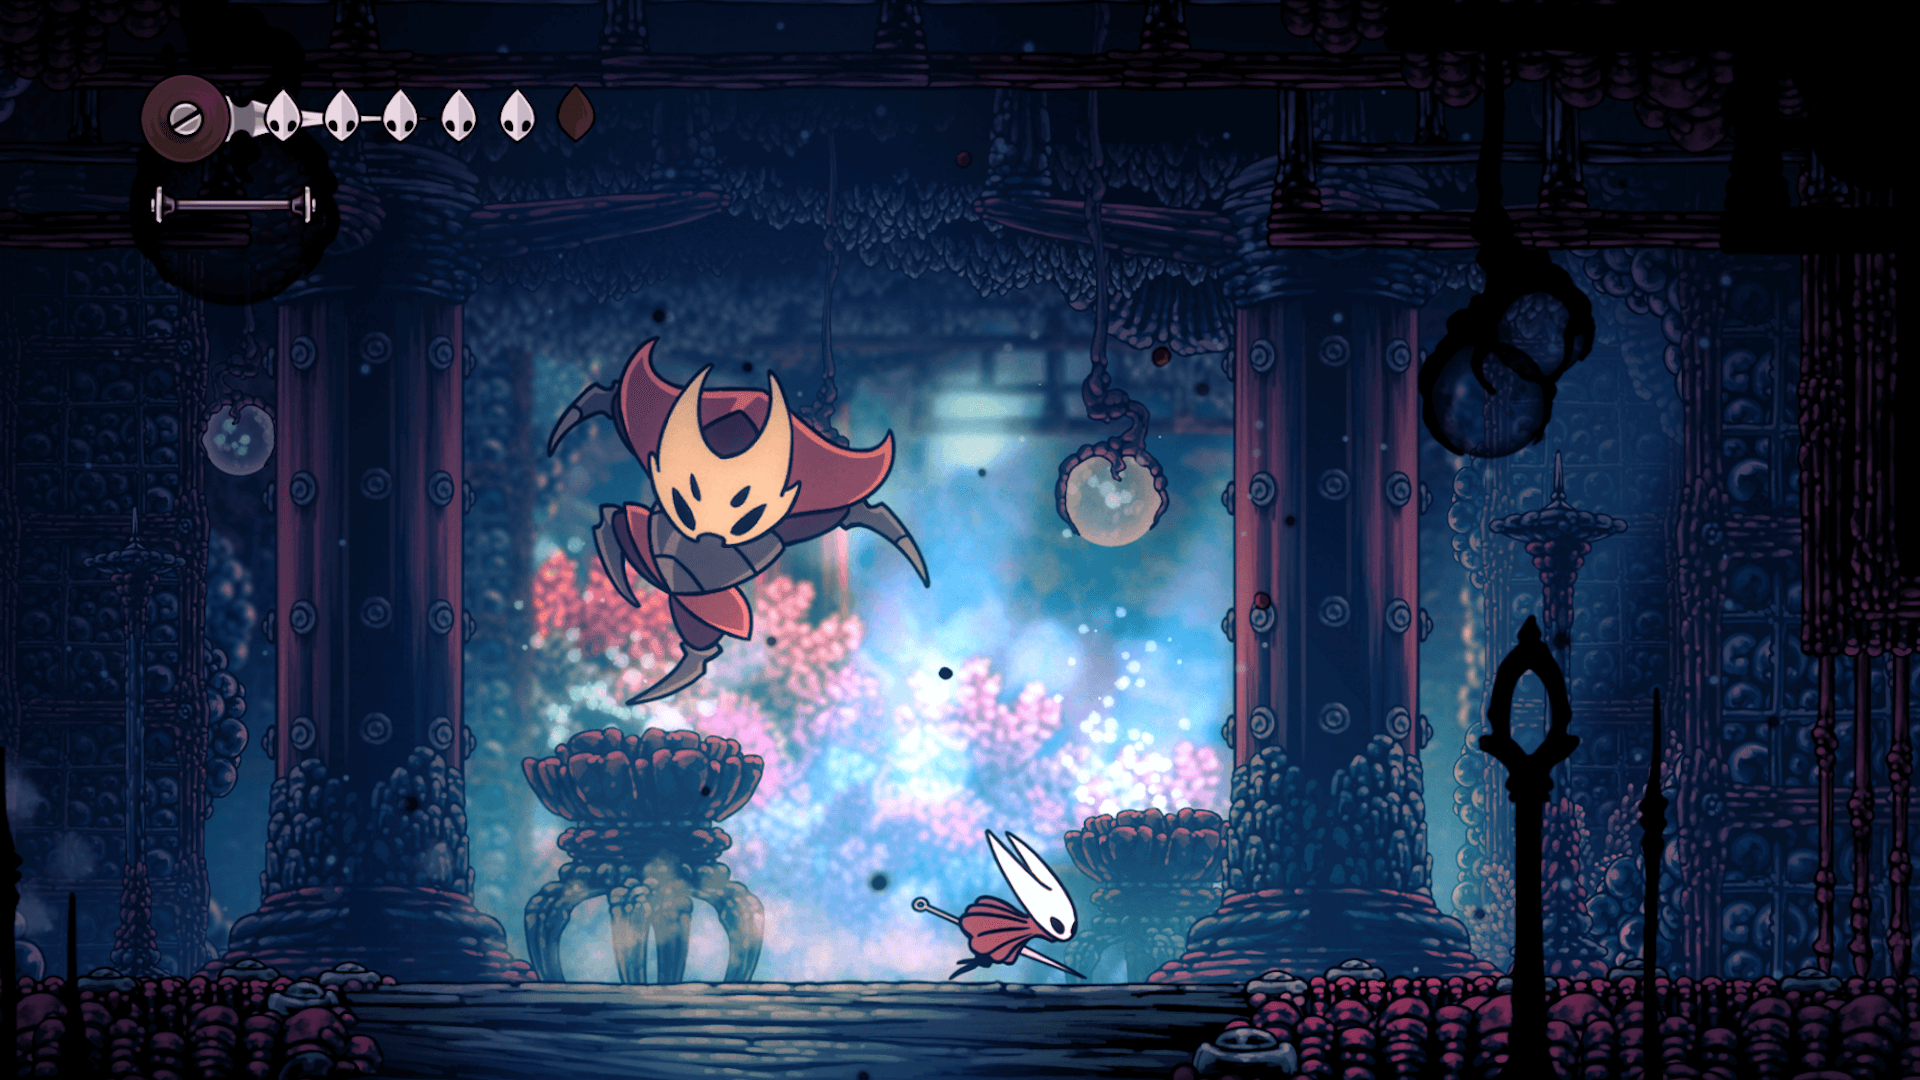 Hollow Knight: Silksong Will Not Be At E3, Team Cherry Confirms